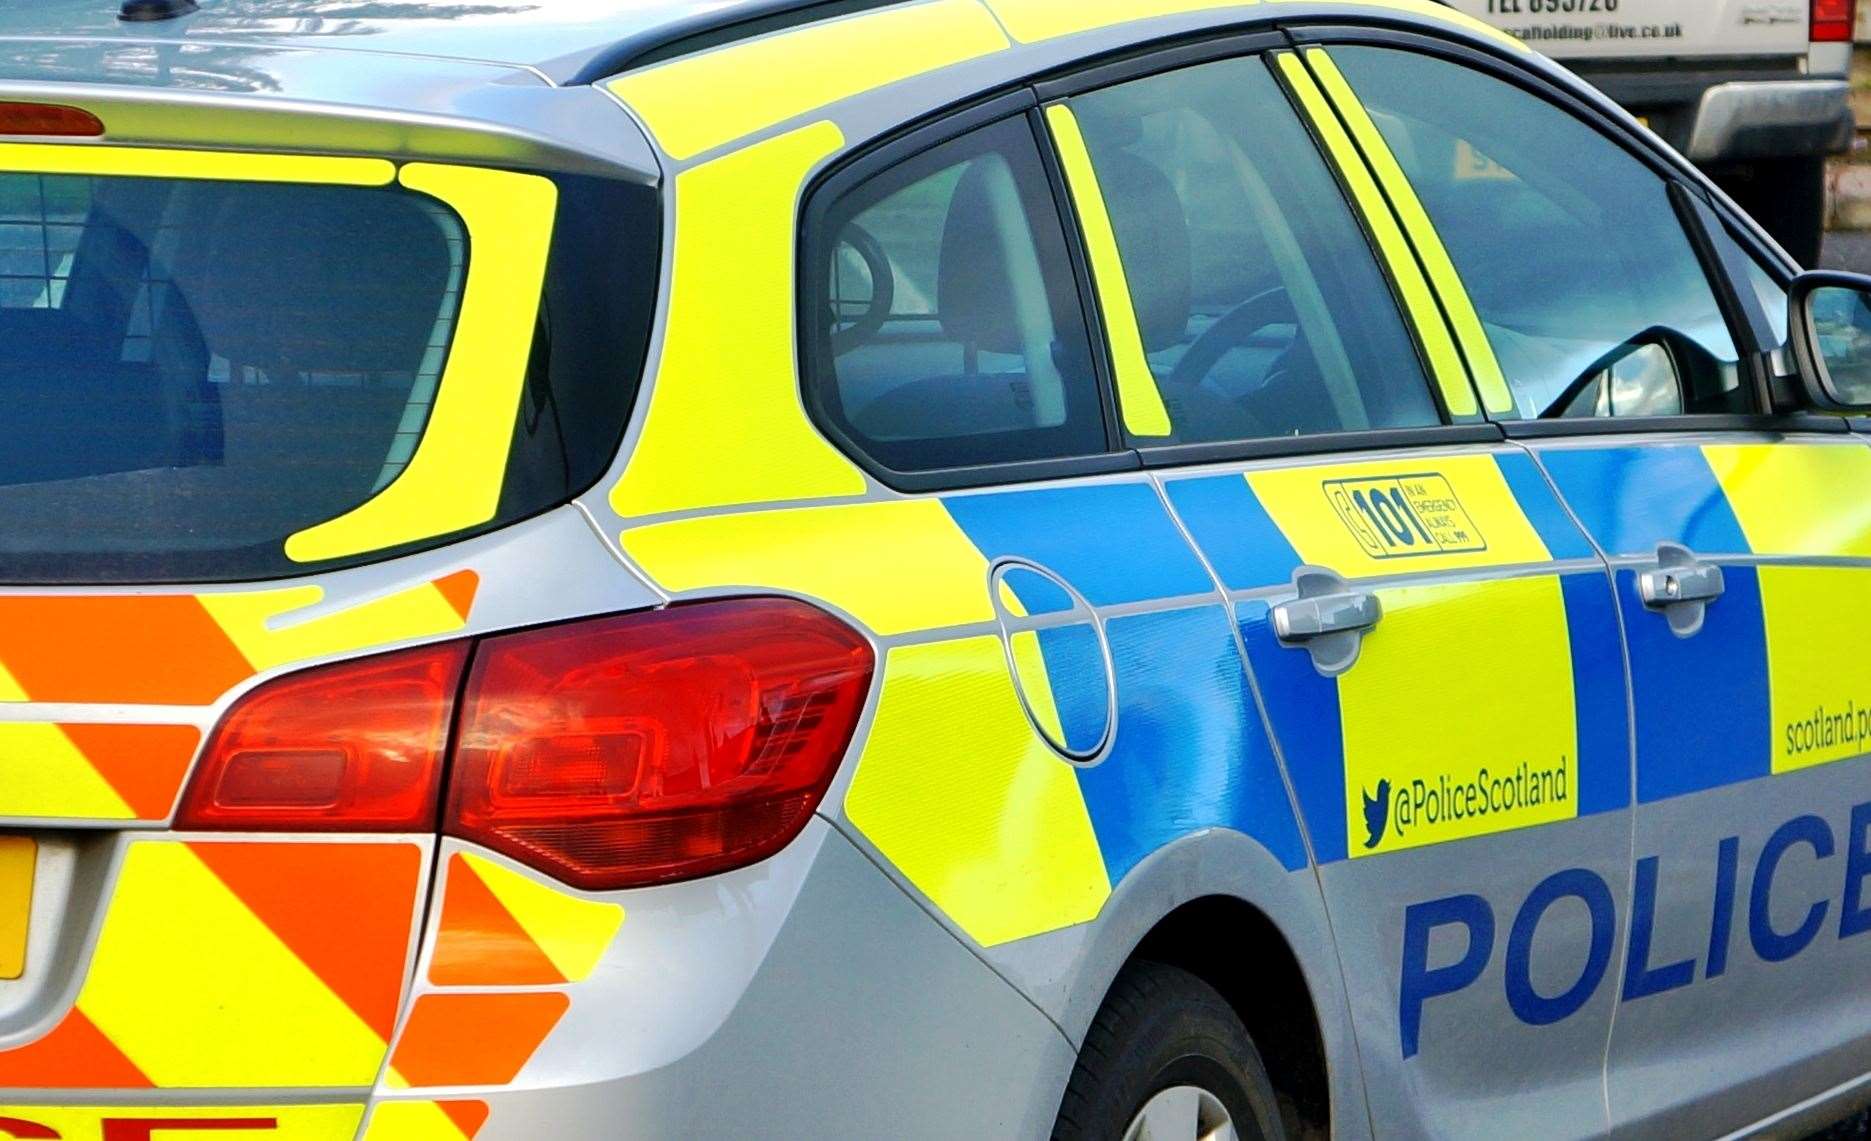 Police Scotland launch witness appeal following fatal A9 crash.